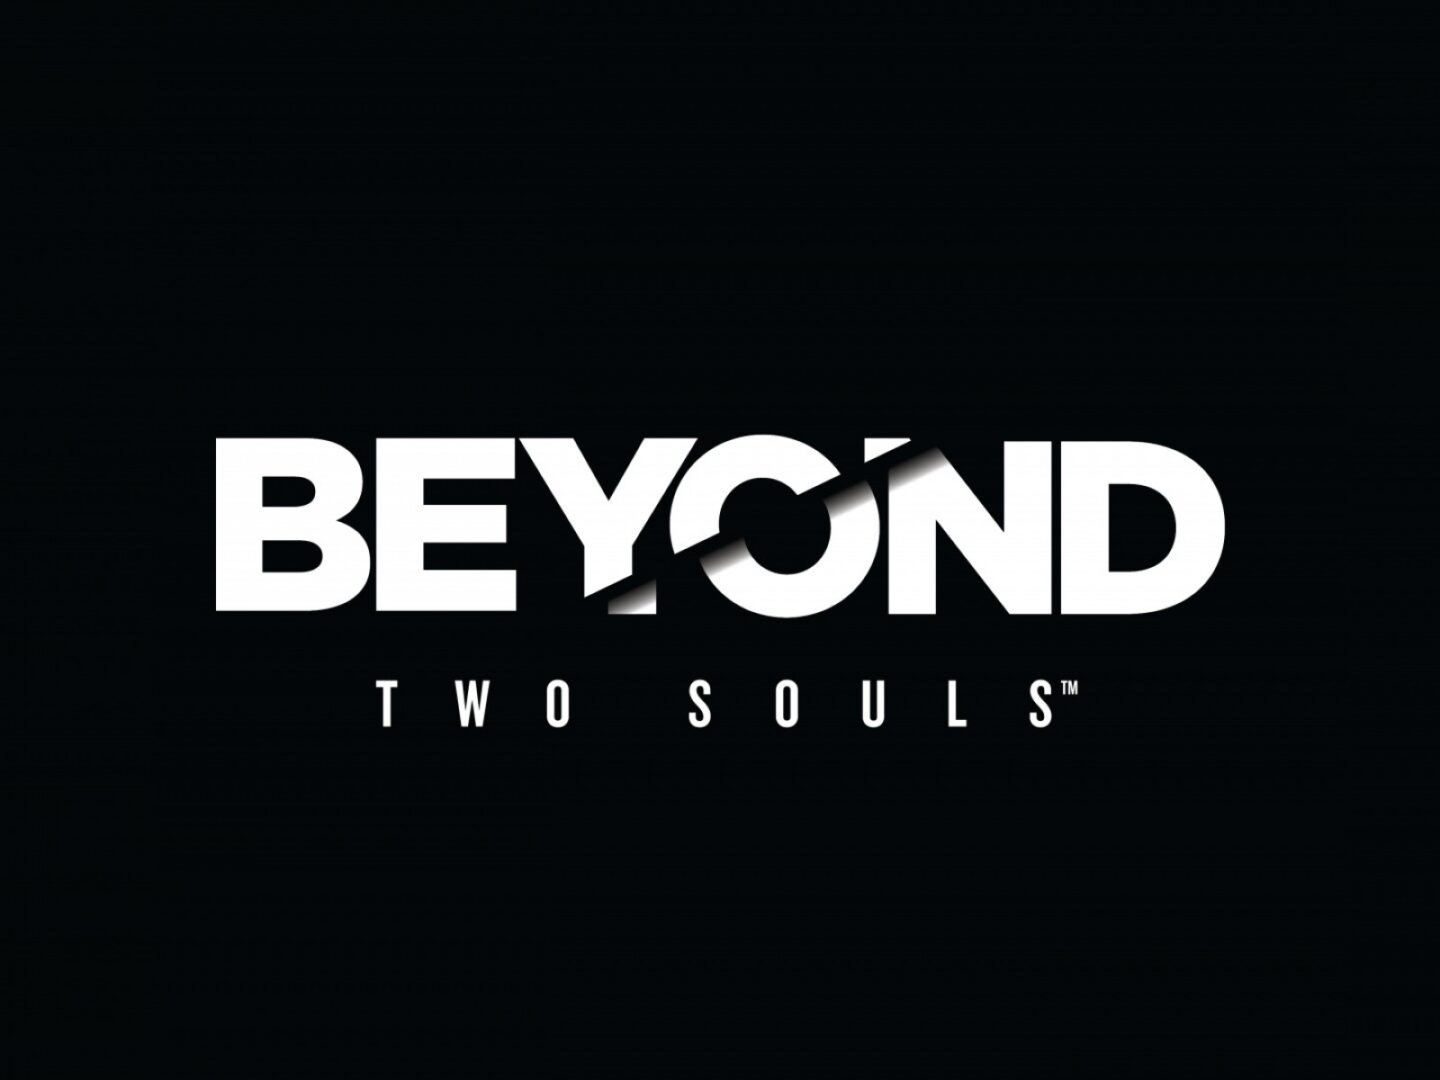 A black and white logo of the game beyond two souls.